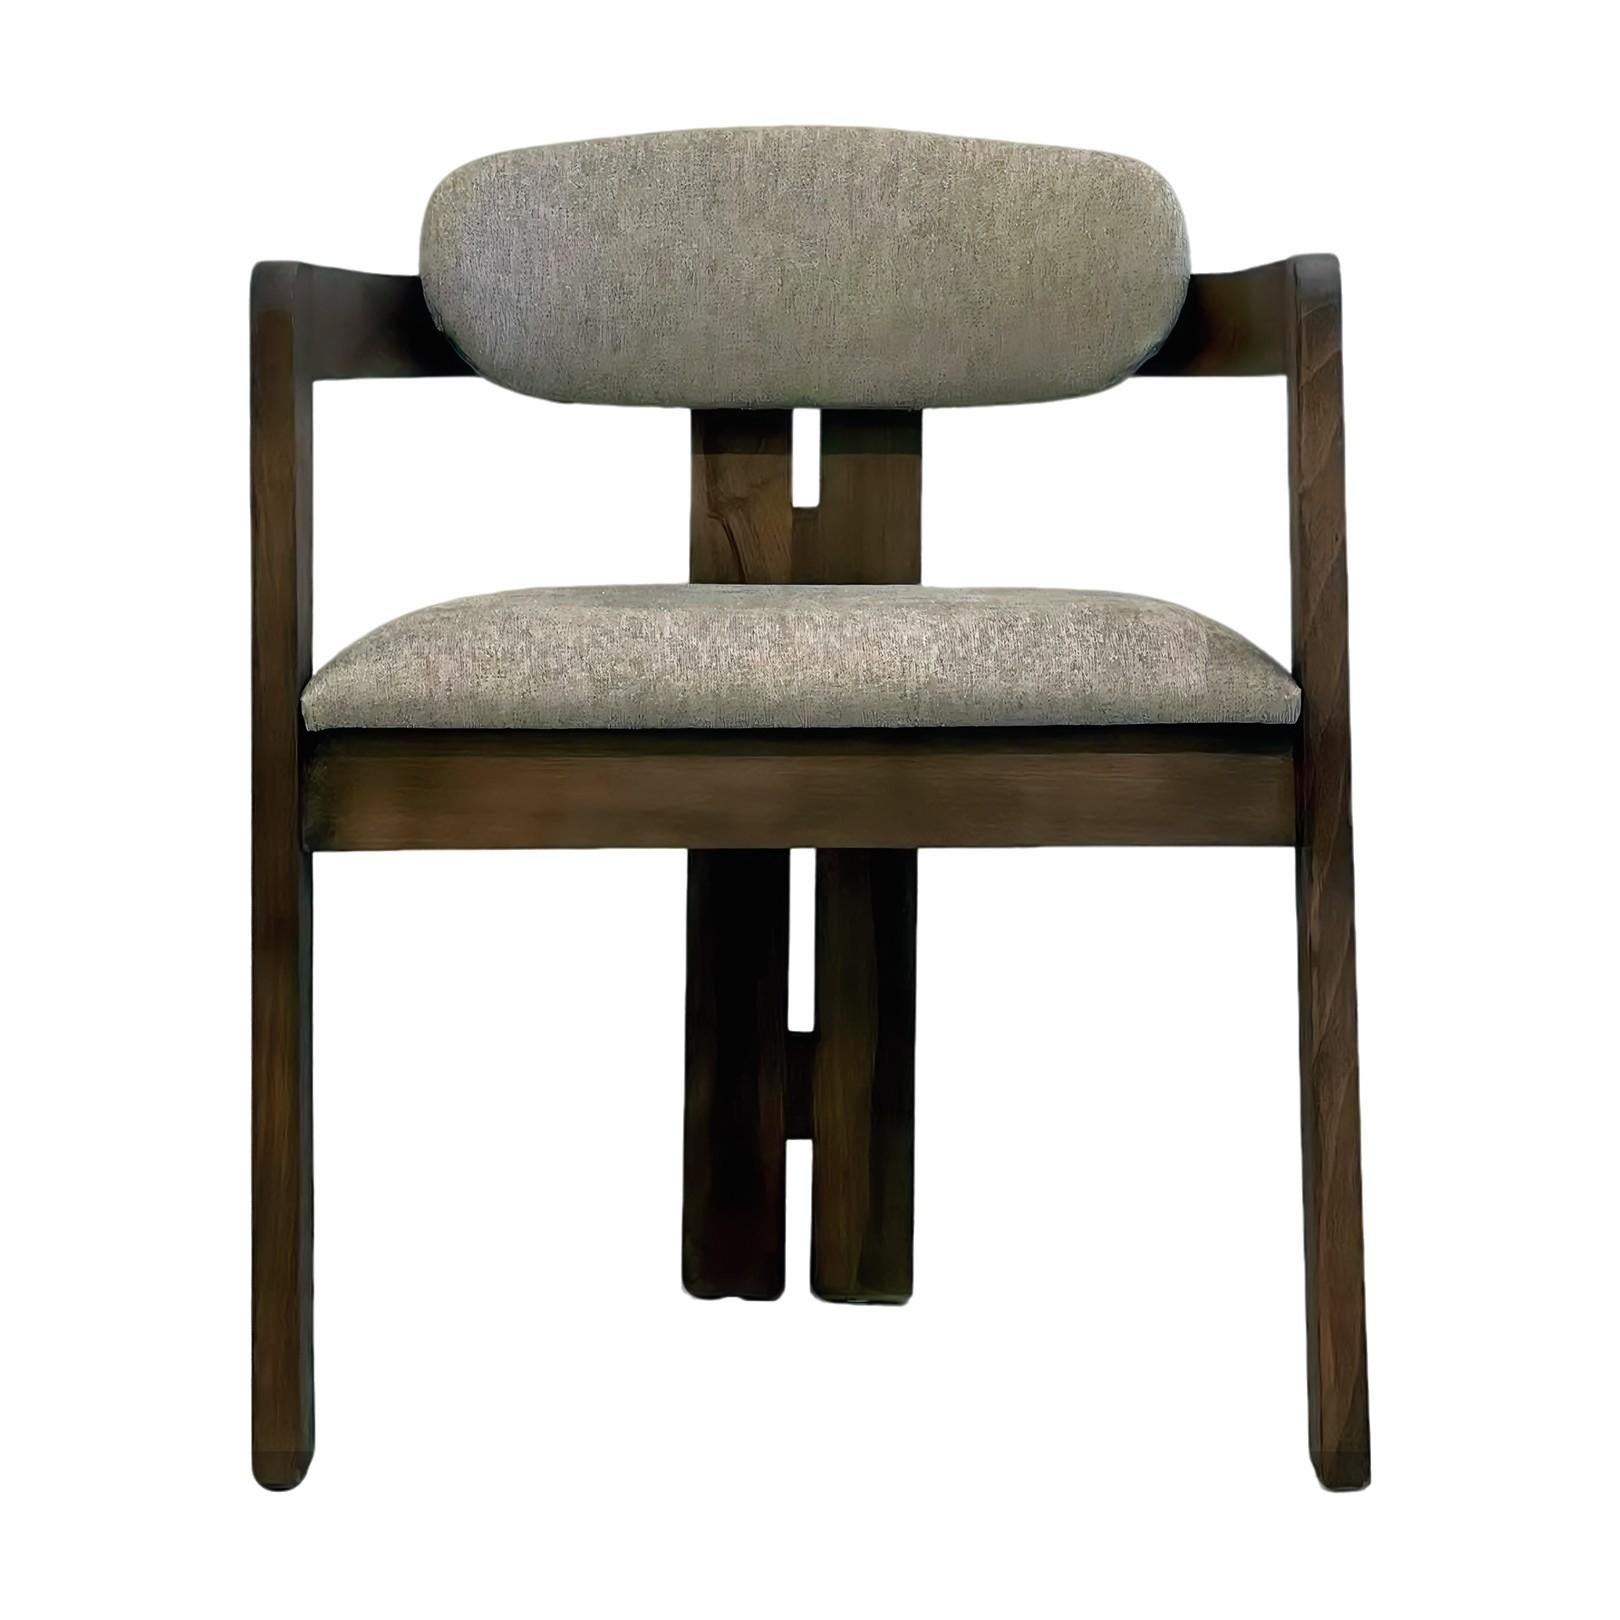 Henley Curve back arm chair with upholstered seat and back. Elegant dining chair with stunning modern silhouette.
Chair comes upholstered in COM. Standard in Walnut as shown, Oak or Pine. Customizable.